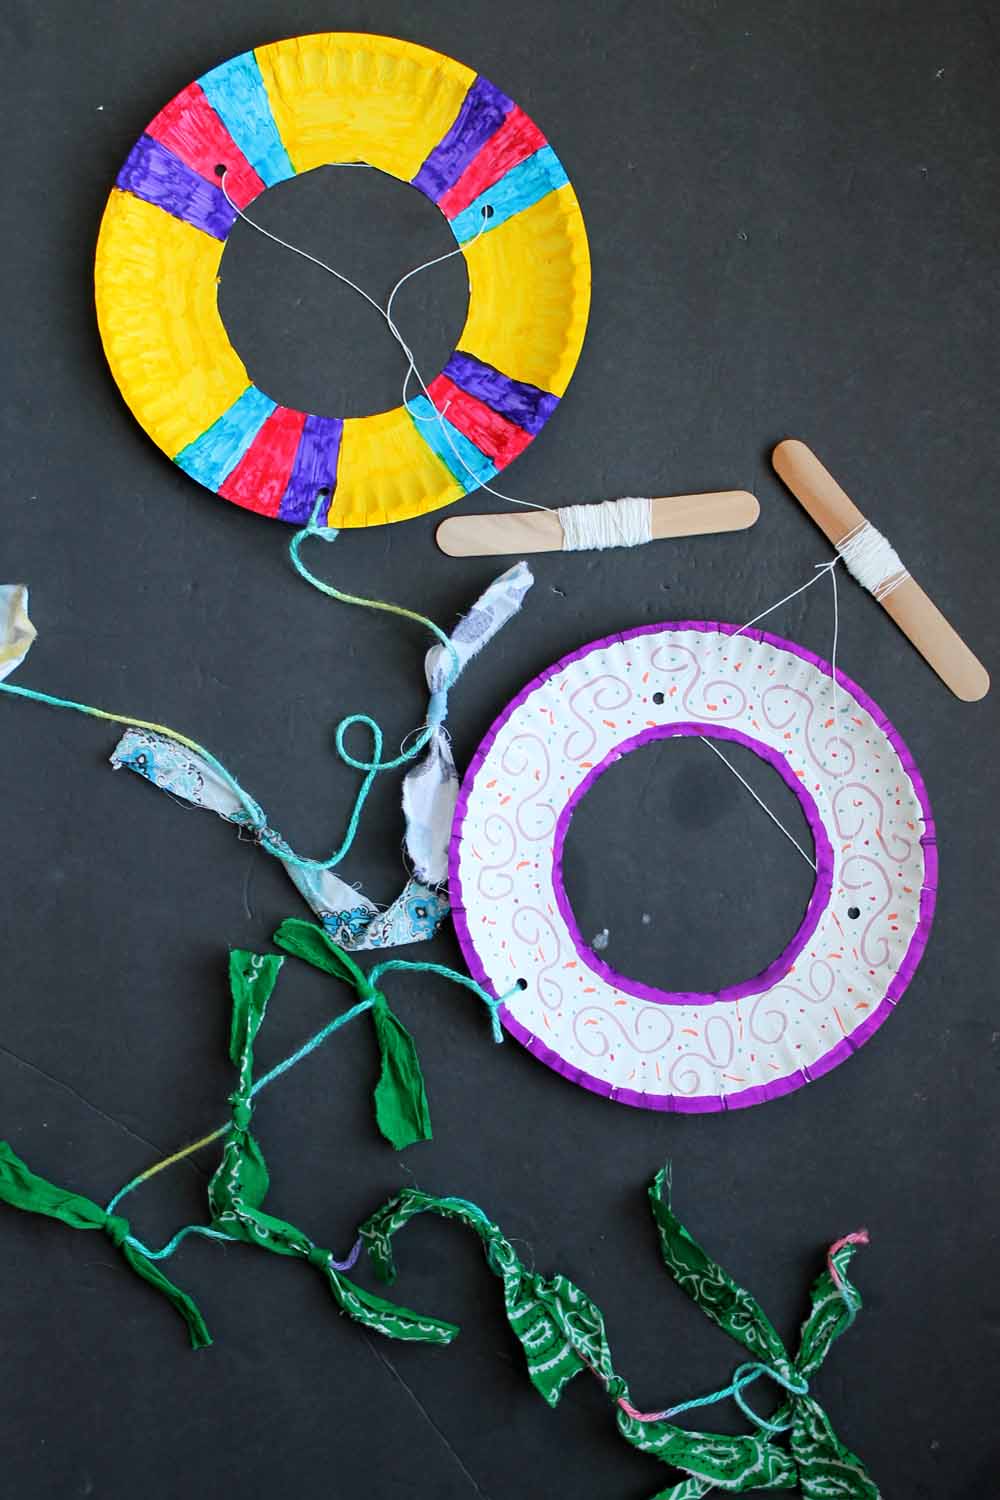 These colorful paper plate crafts are perfect hands-on activities for kids